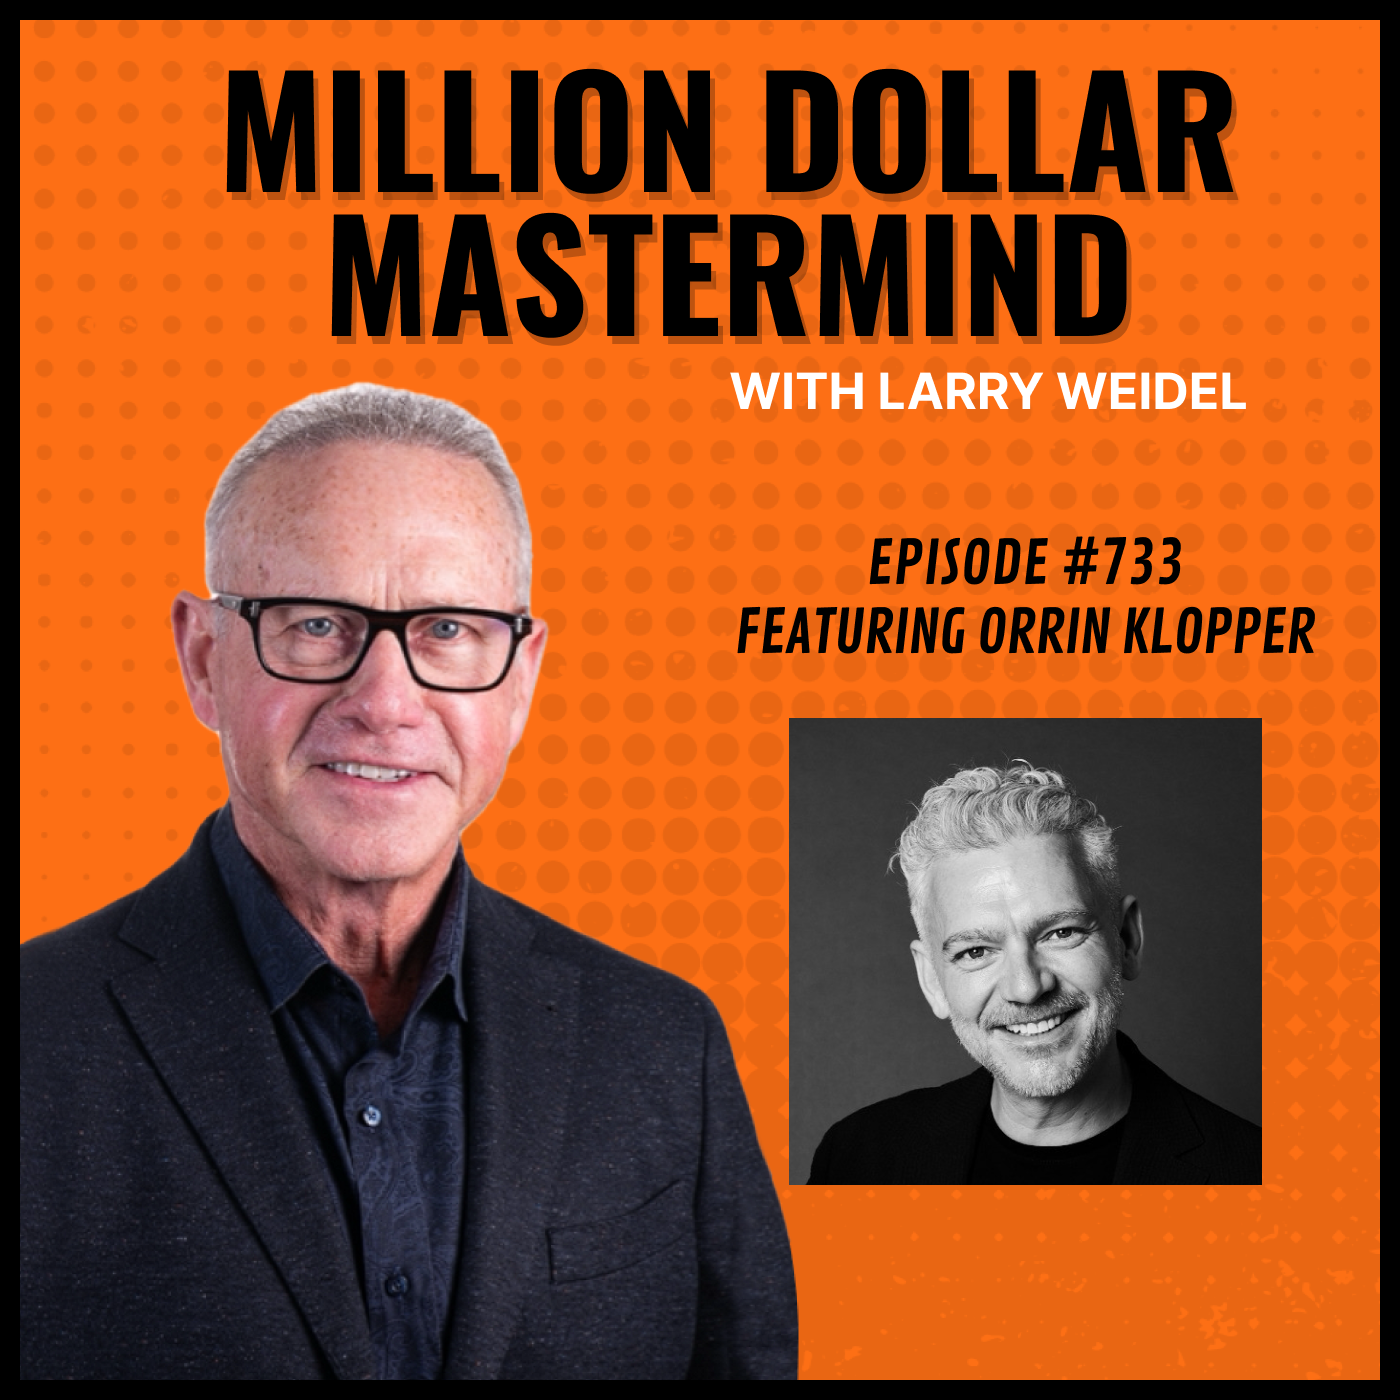 Episode #733 - You Can Find A Work-Life Balance with Orrin Klopper, Co-Founder and CEO of Netsurit